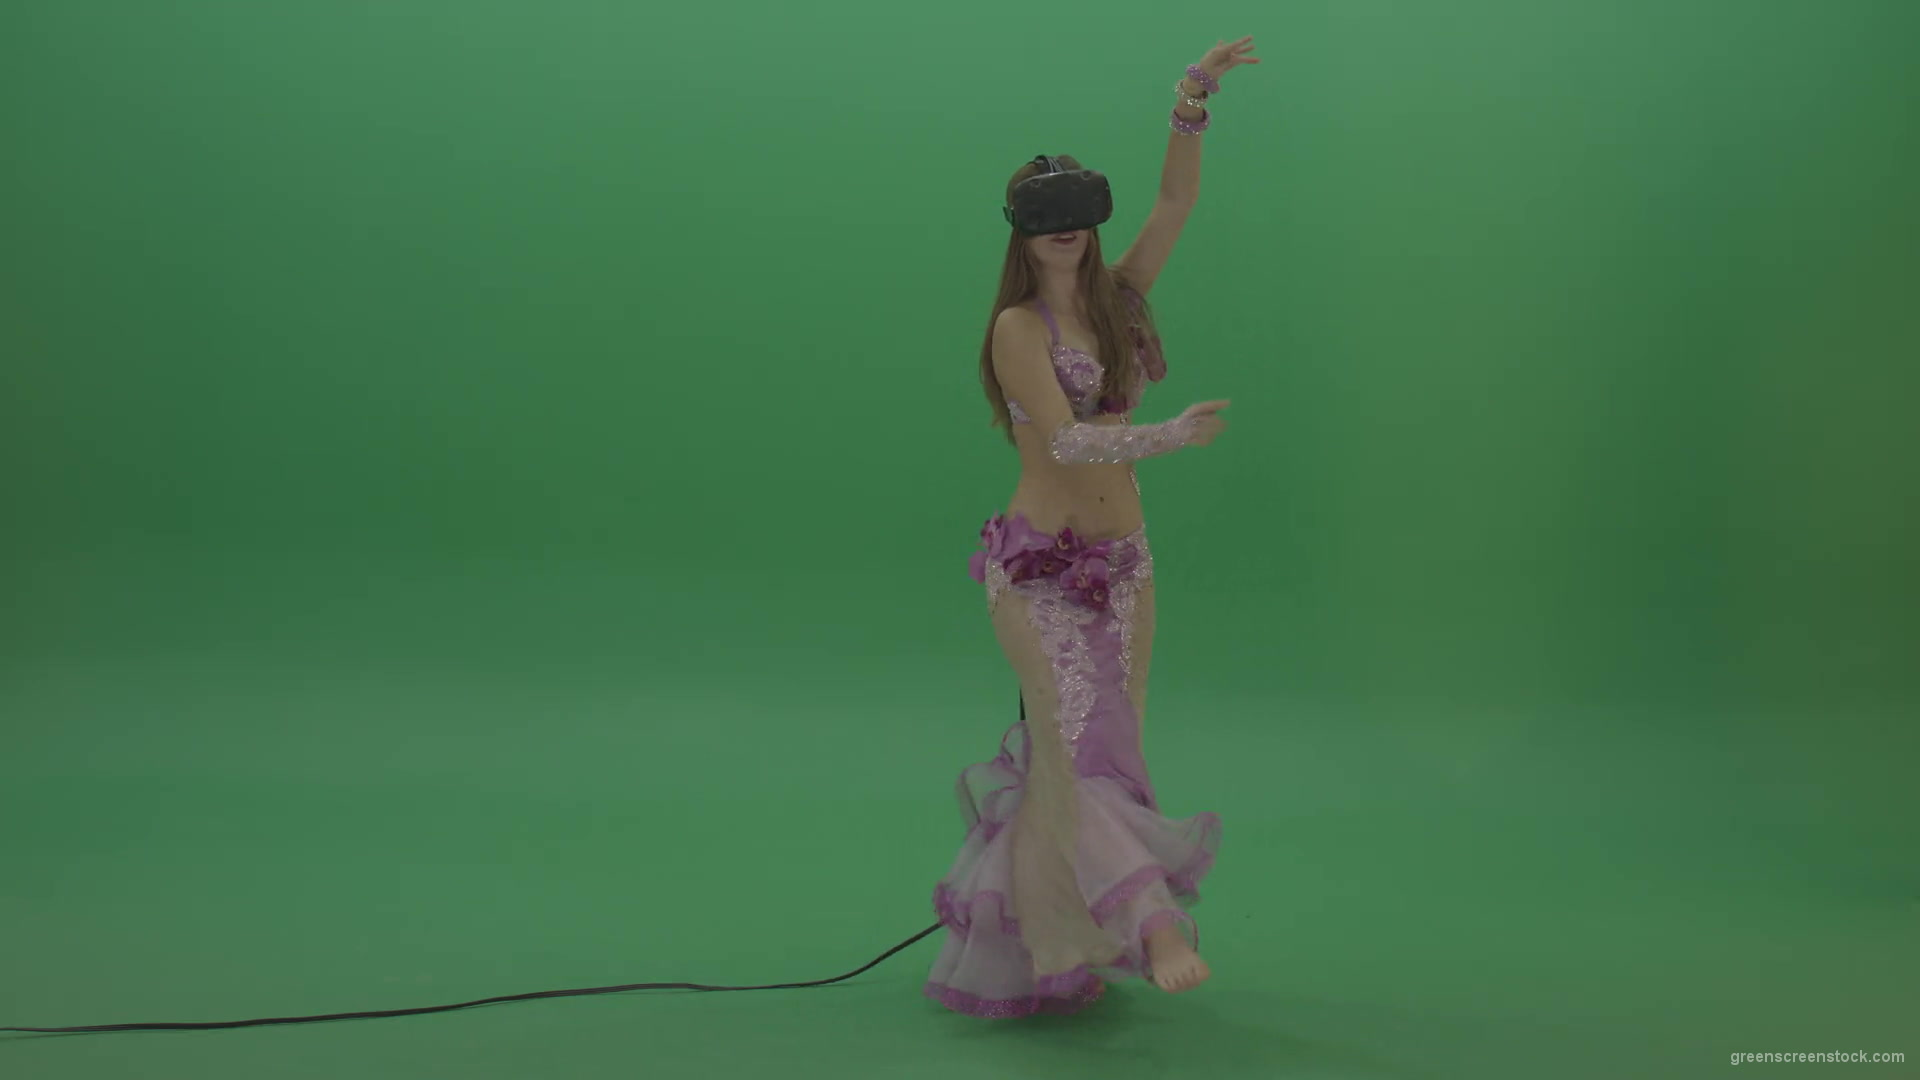 Beautiful-belly-dancer-in-purple-wear-and-VR-headset-dances-over-green-screen-background-1920_006 Green Screen Stock